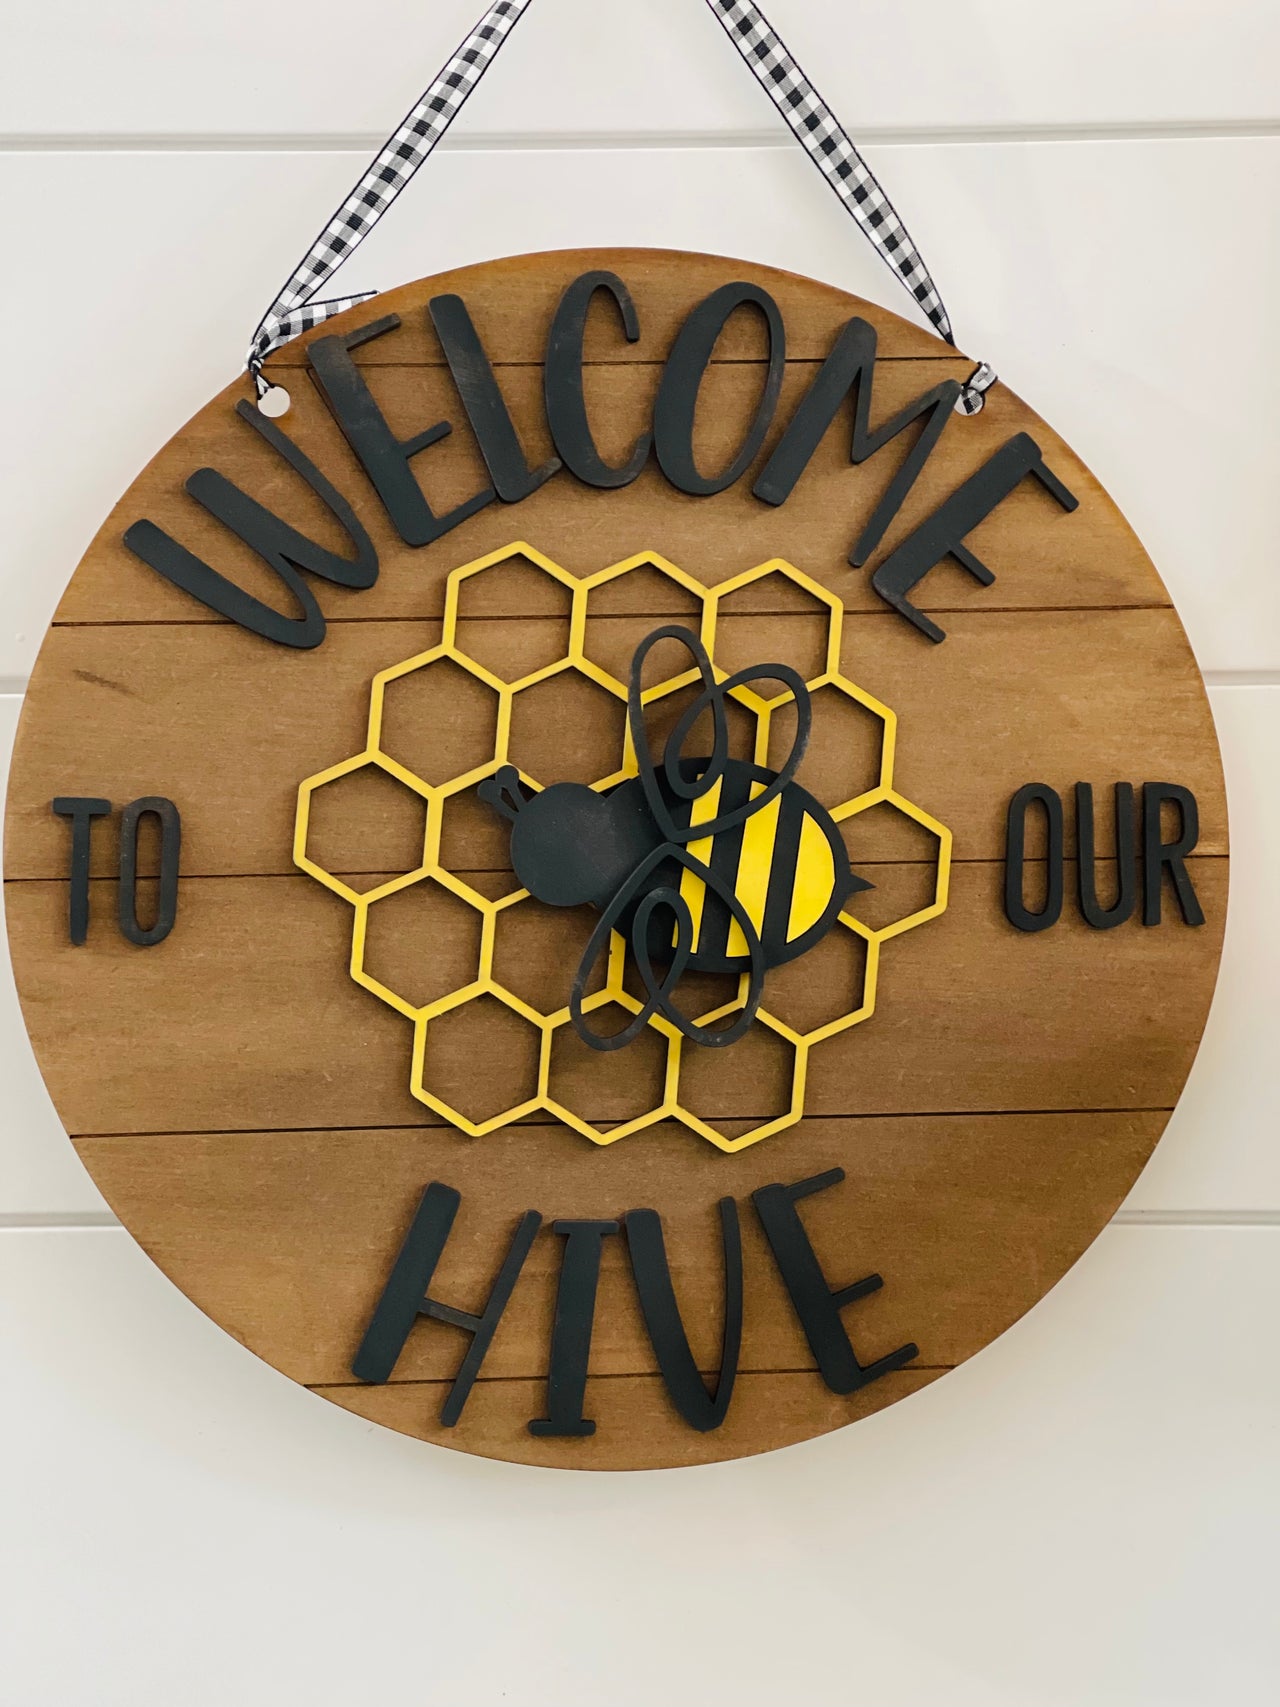 Welcome to our Hive sign  - Pick a Project - In- Person Workshop